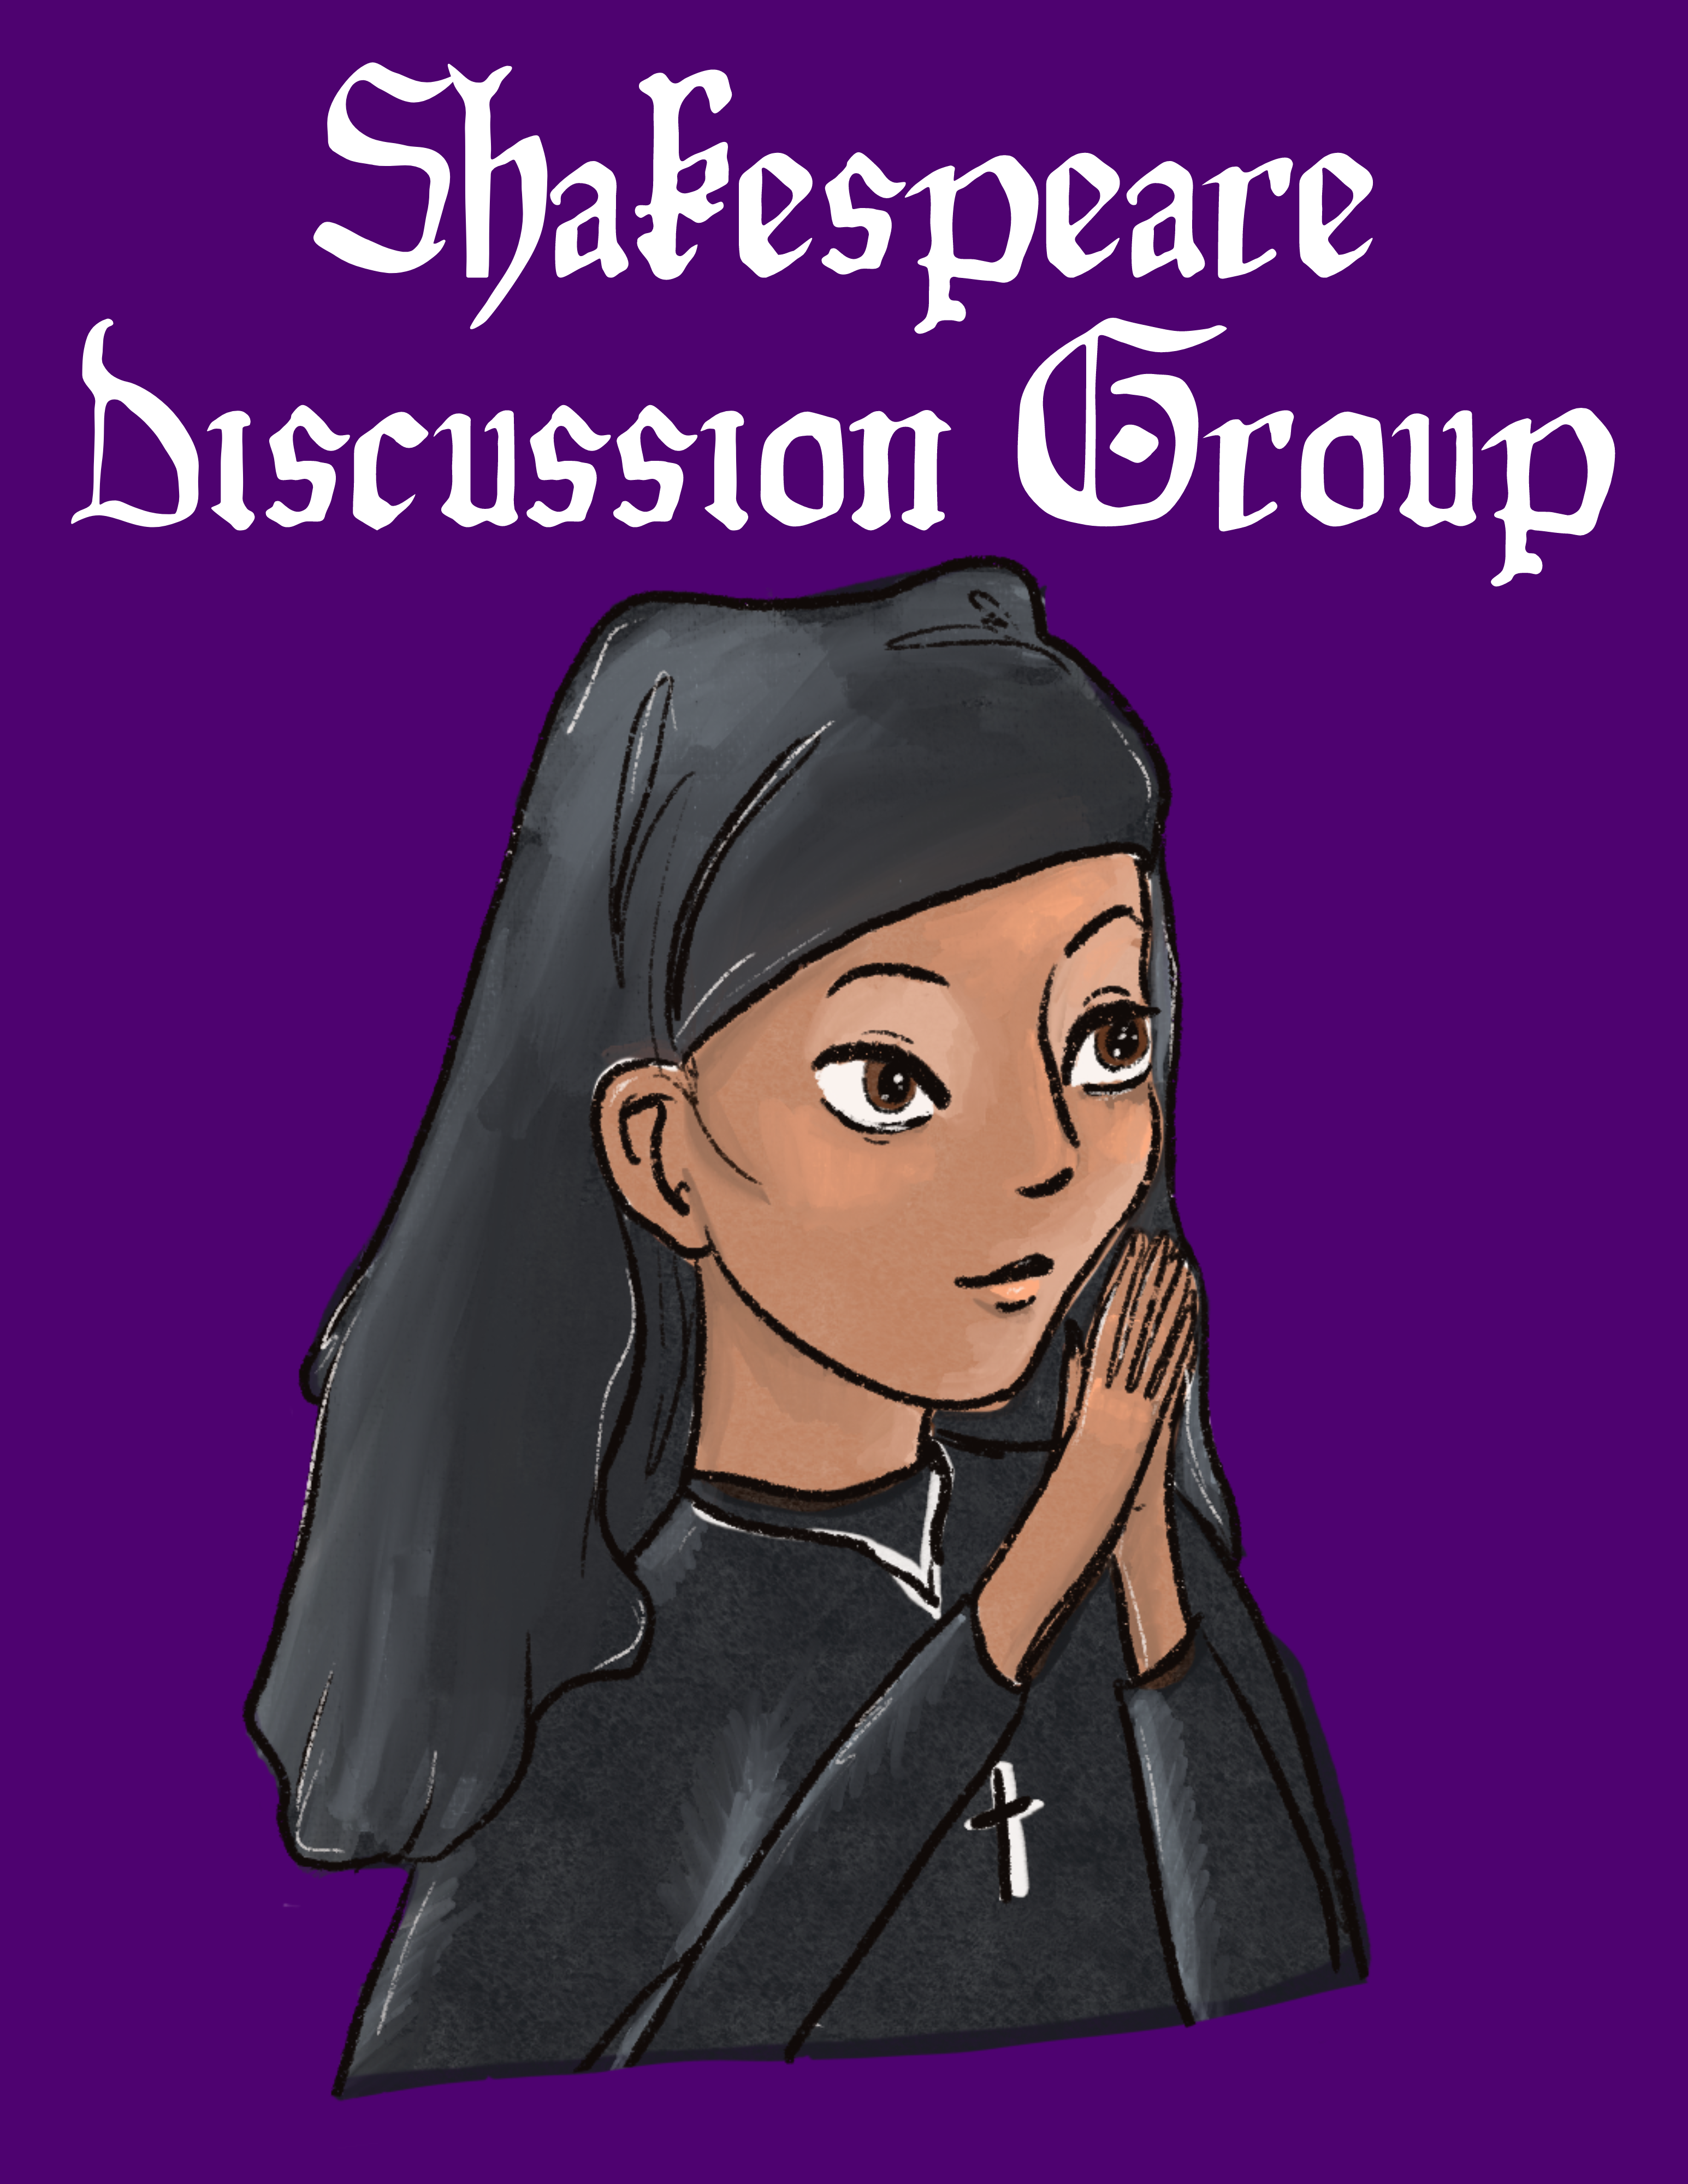 purple background with animated woman with black hair. Shakespeare Discussion Group